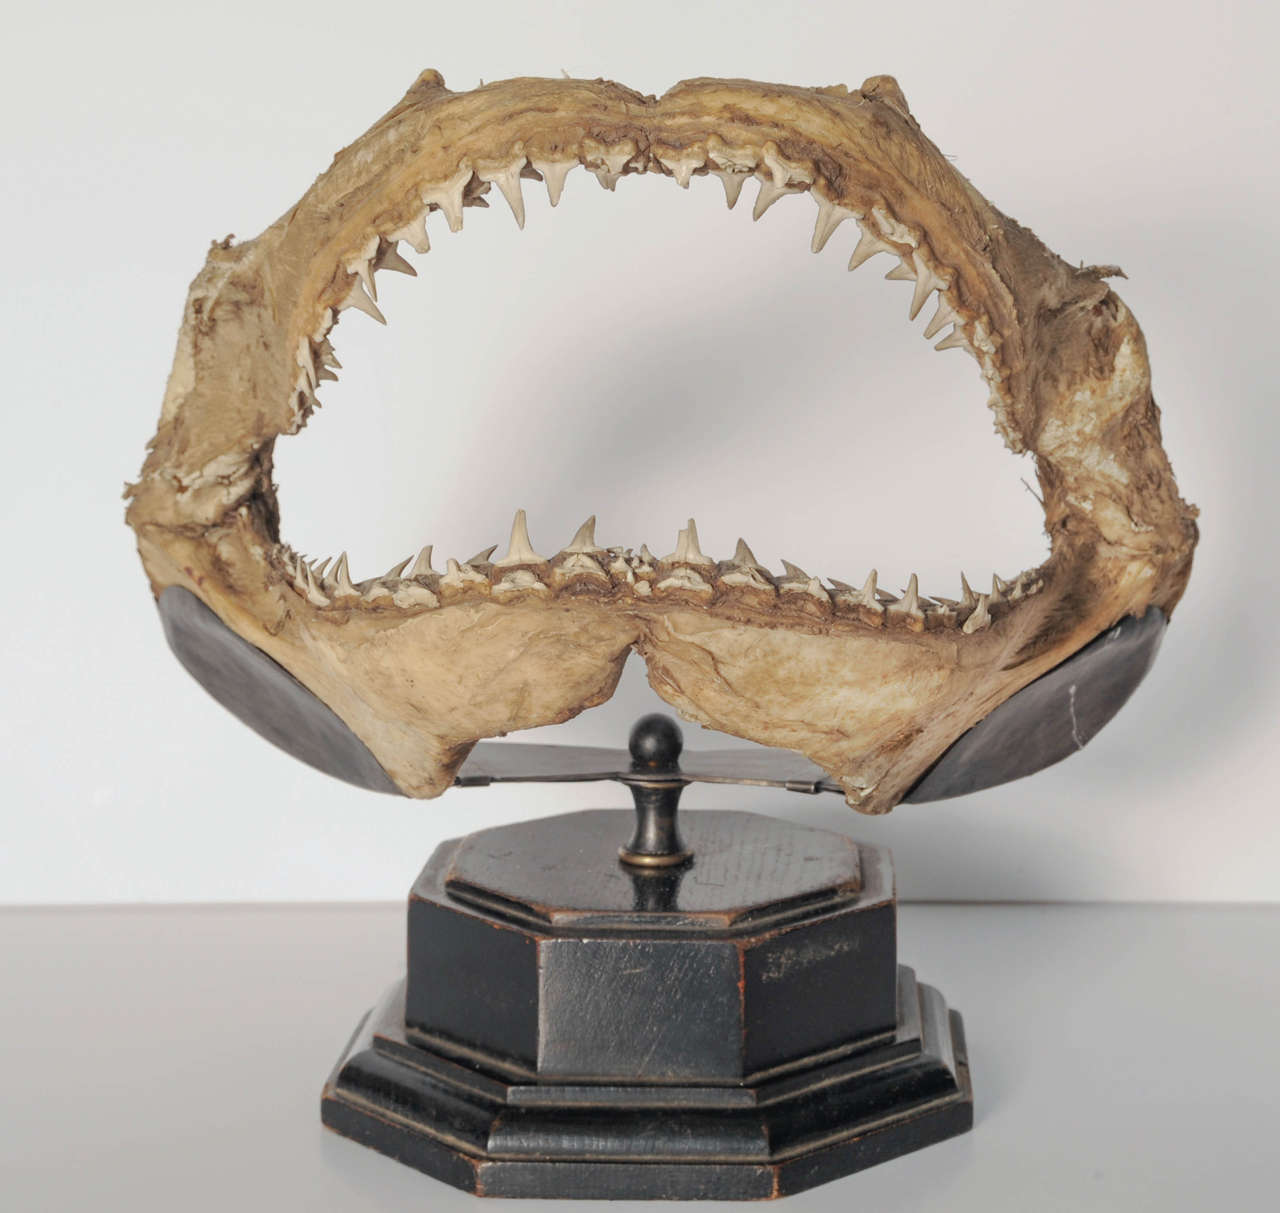 Shark mouth mounted on wooden base.